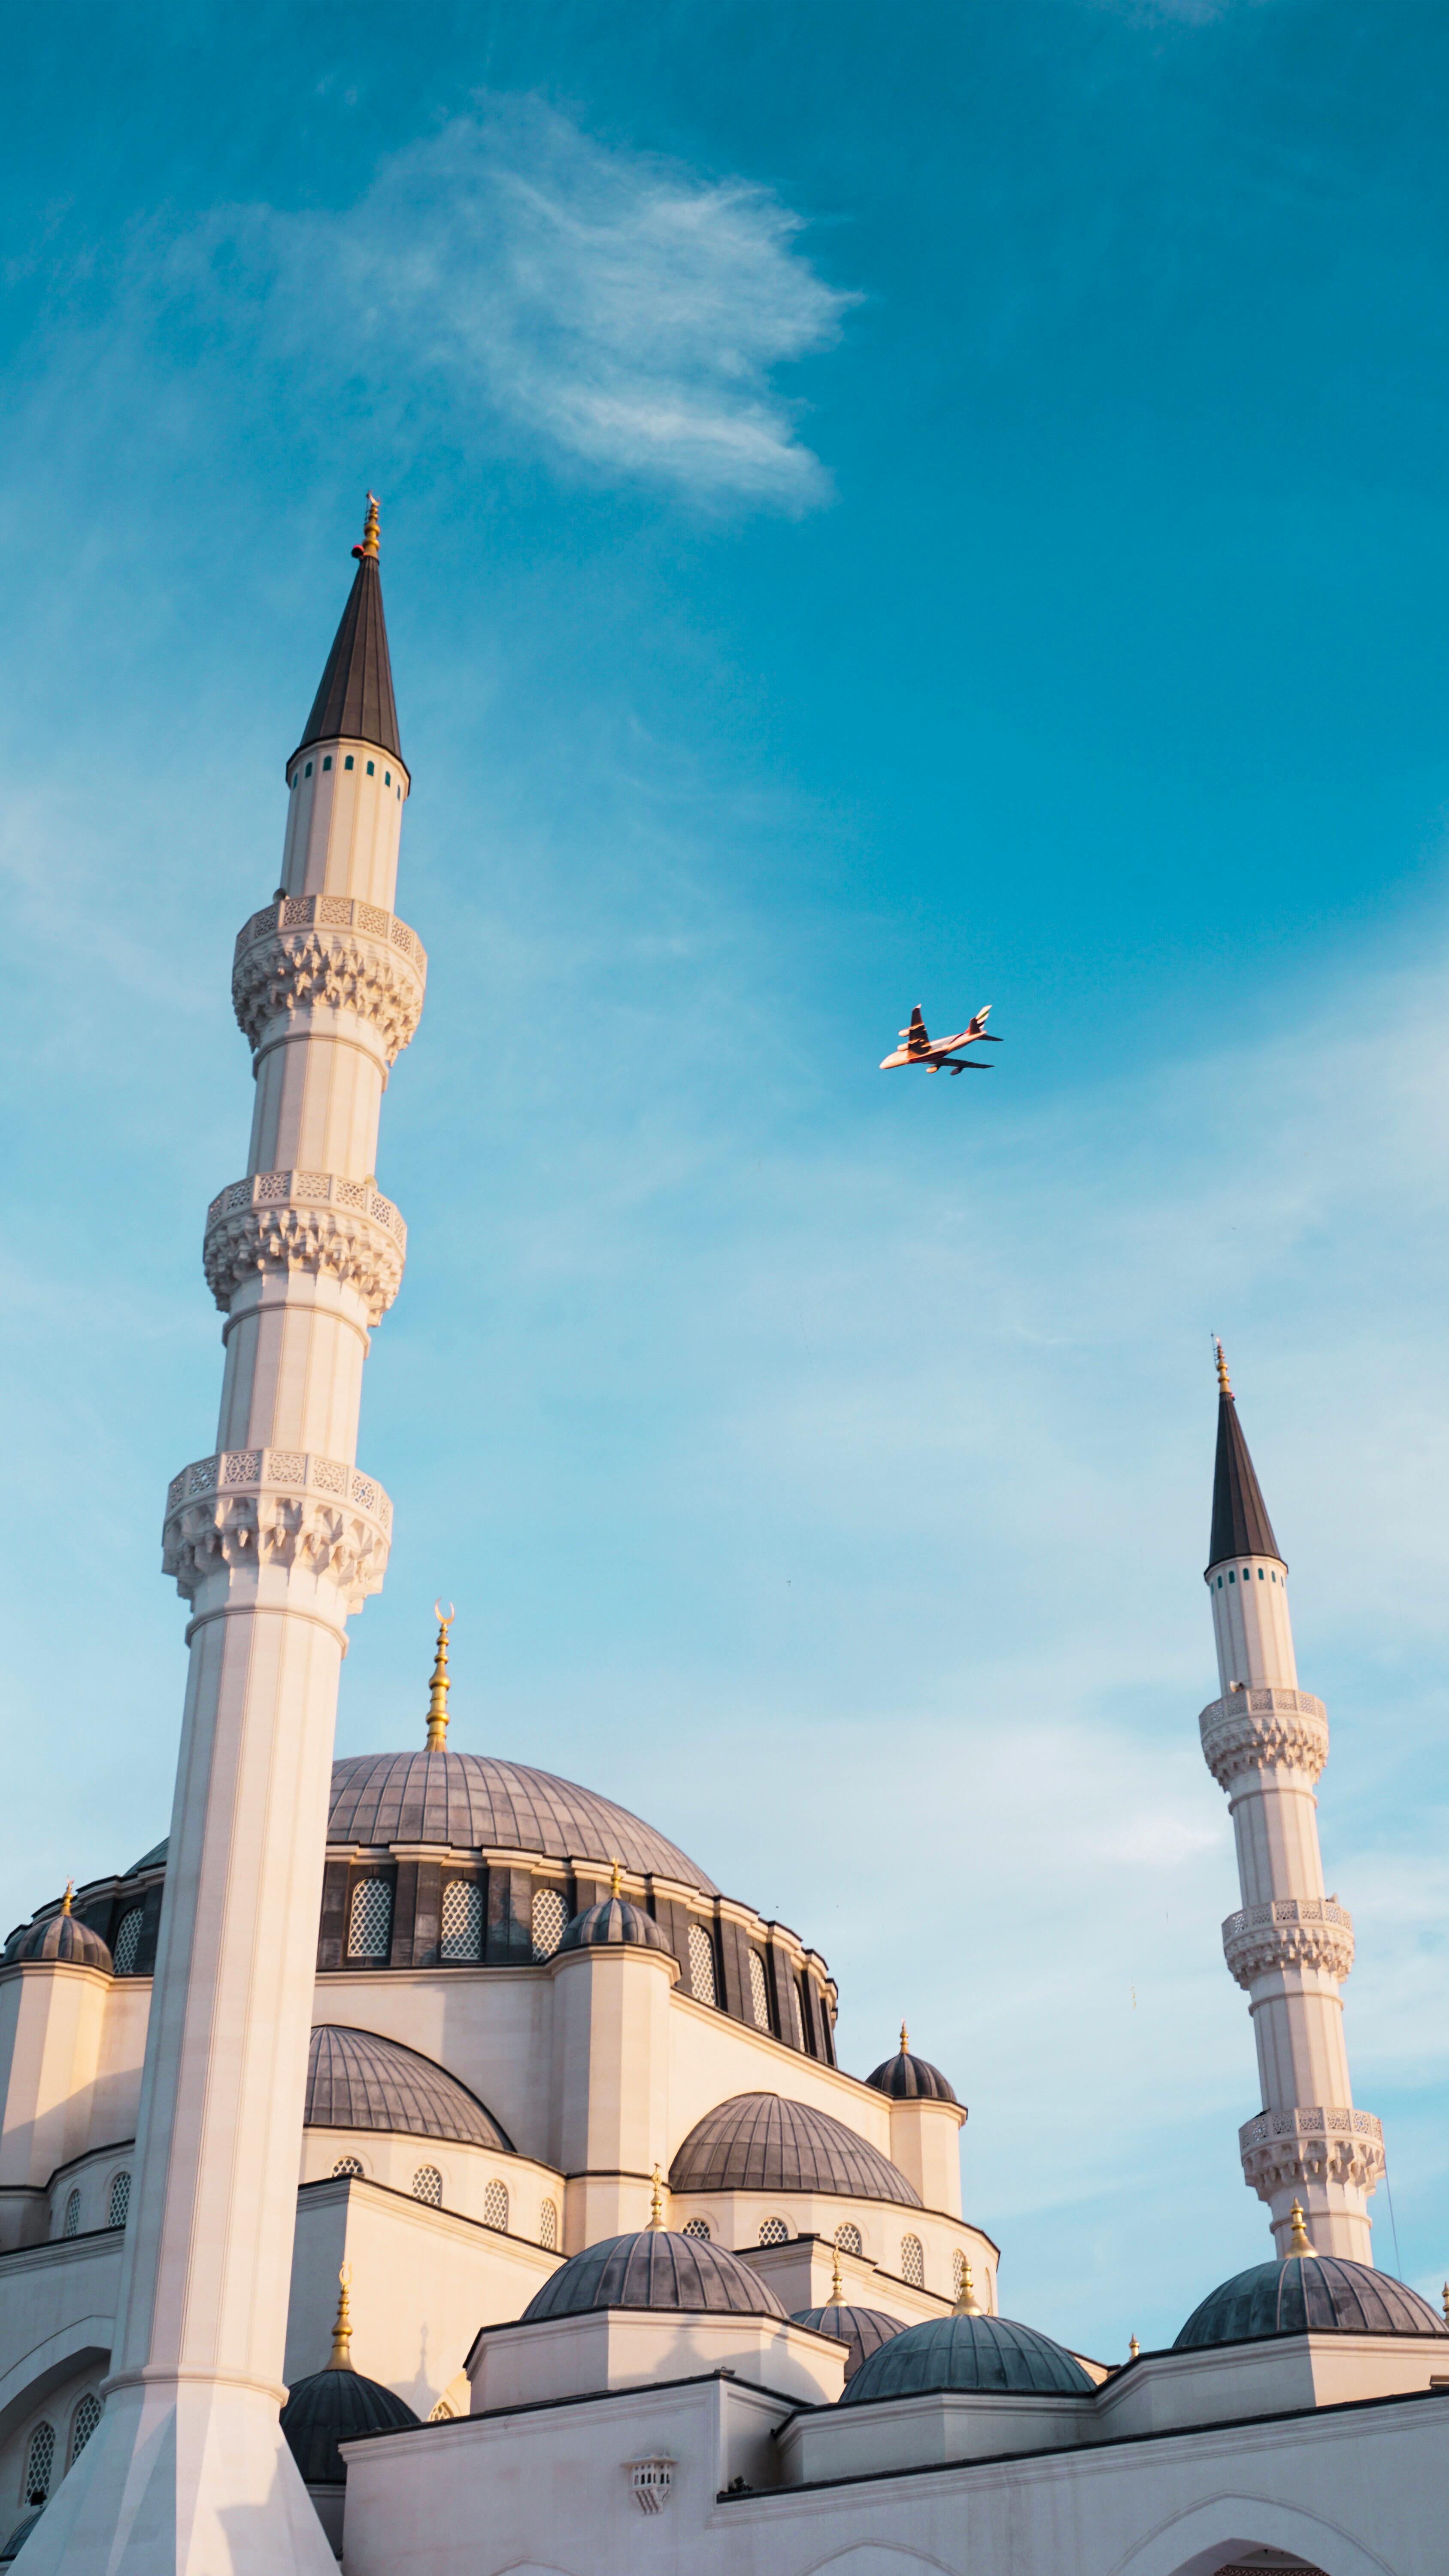 Airplane Flying Over a Mosque Building